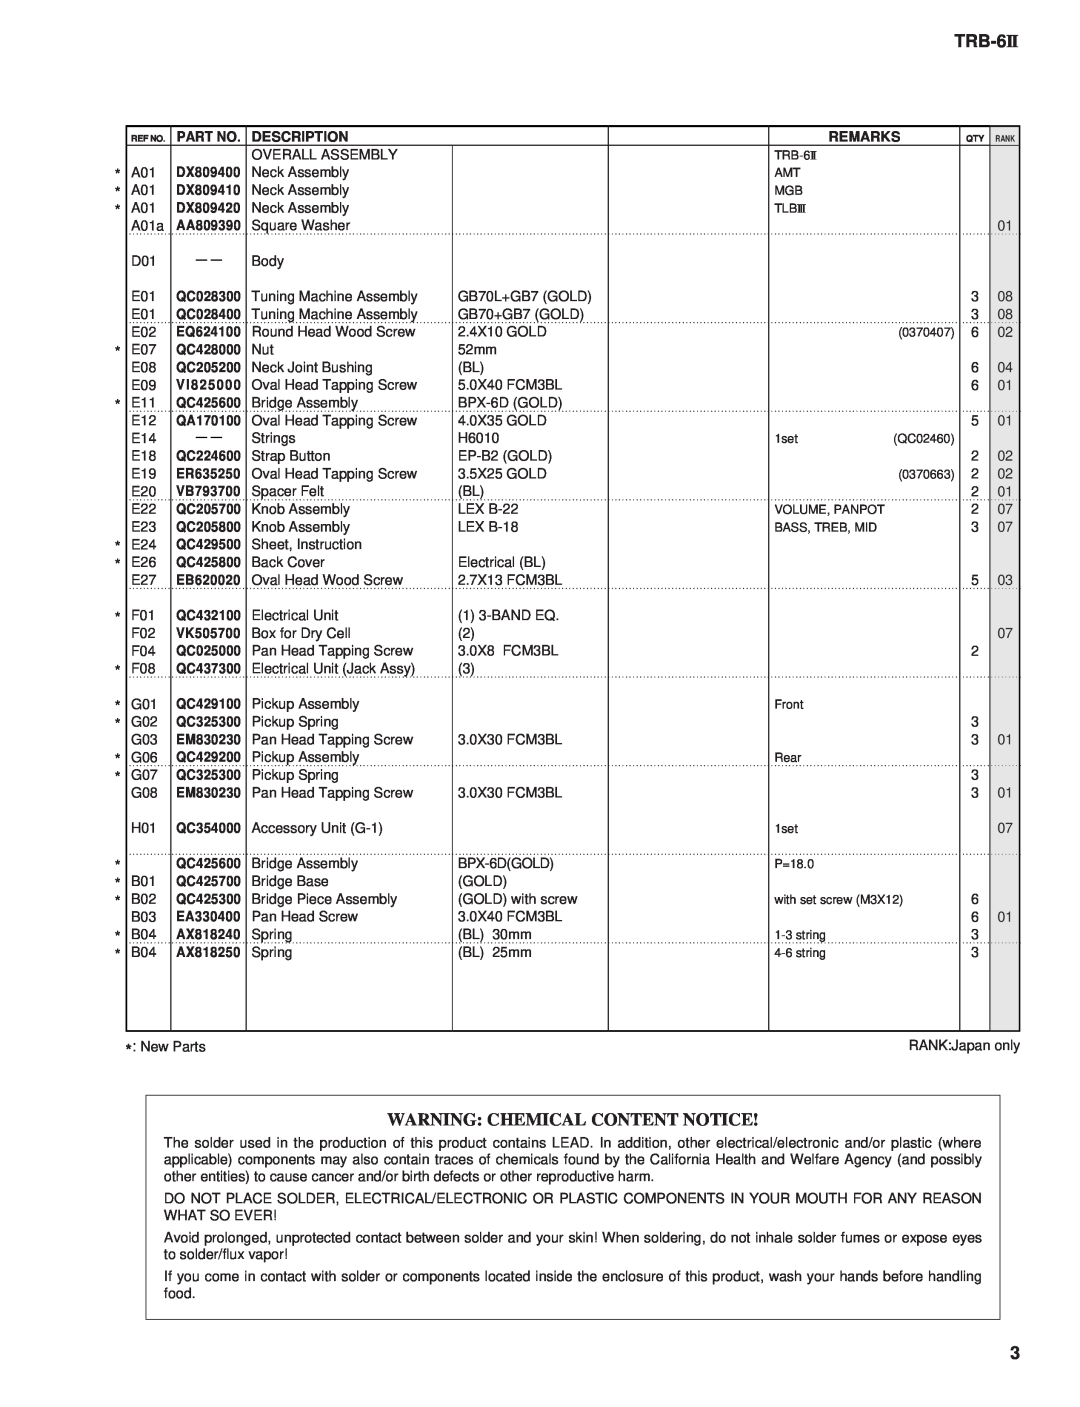 Yamaha 11391, ELECTIC BASS TRB-6 2 service manual TRB-6II, Warning Chemical Content Notice, Ref No 